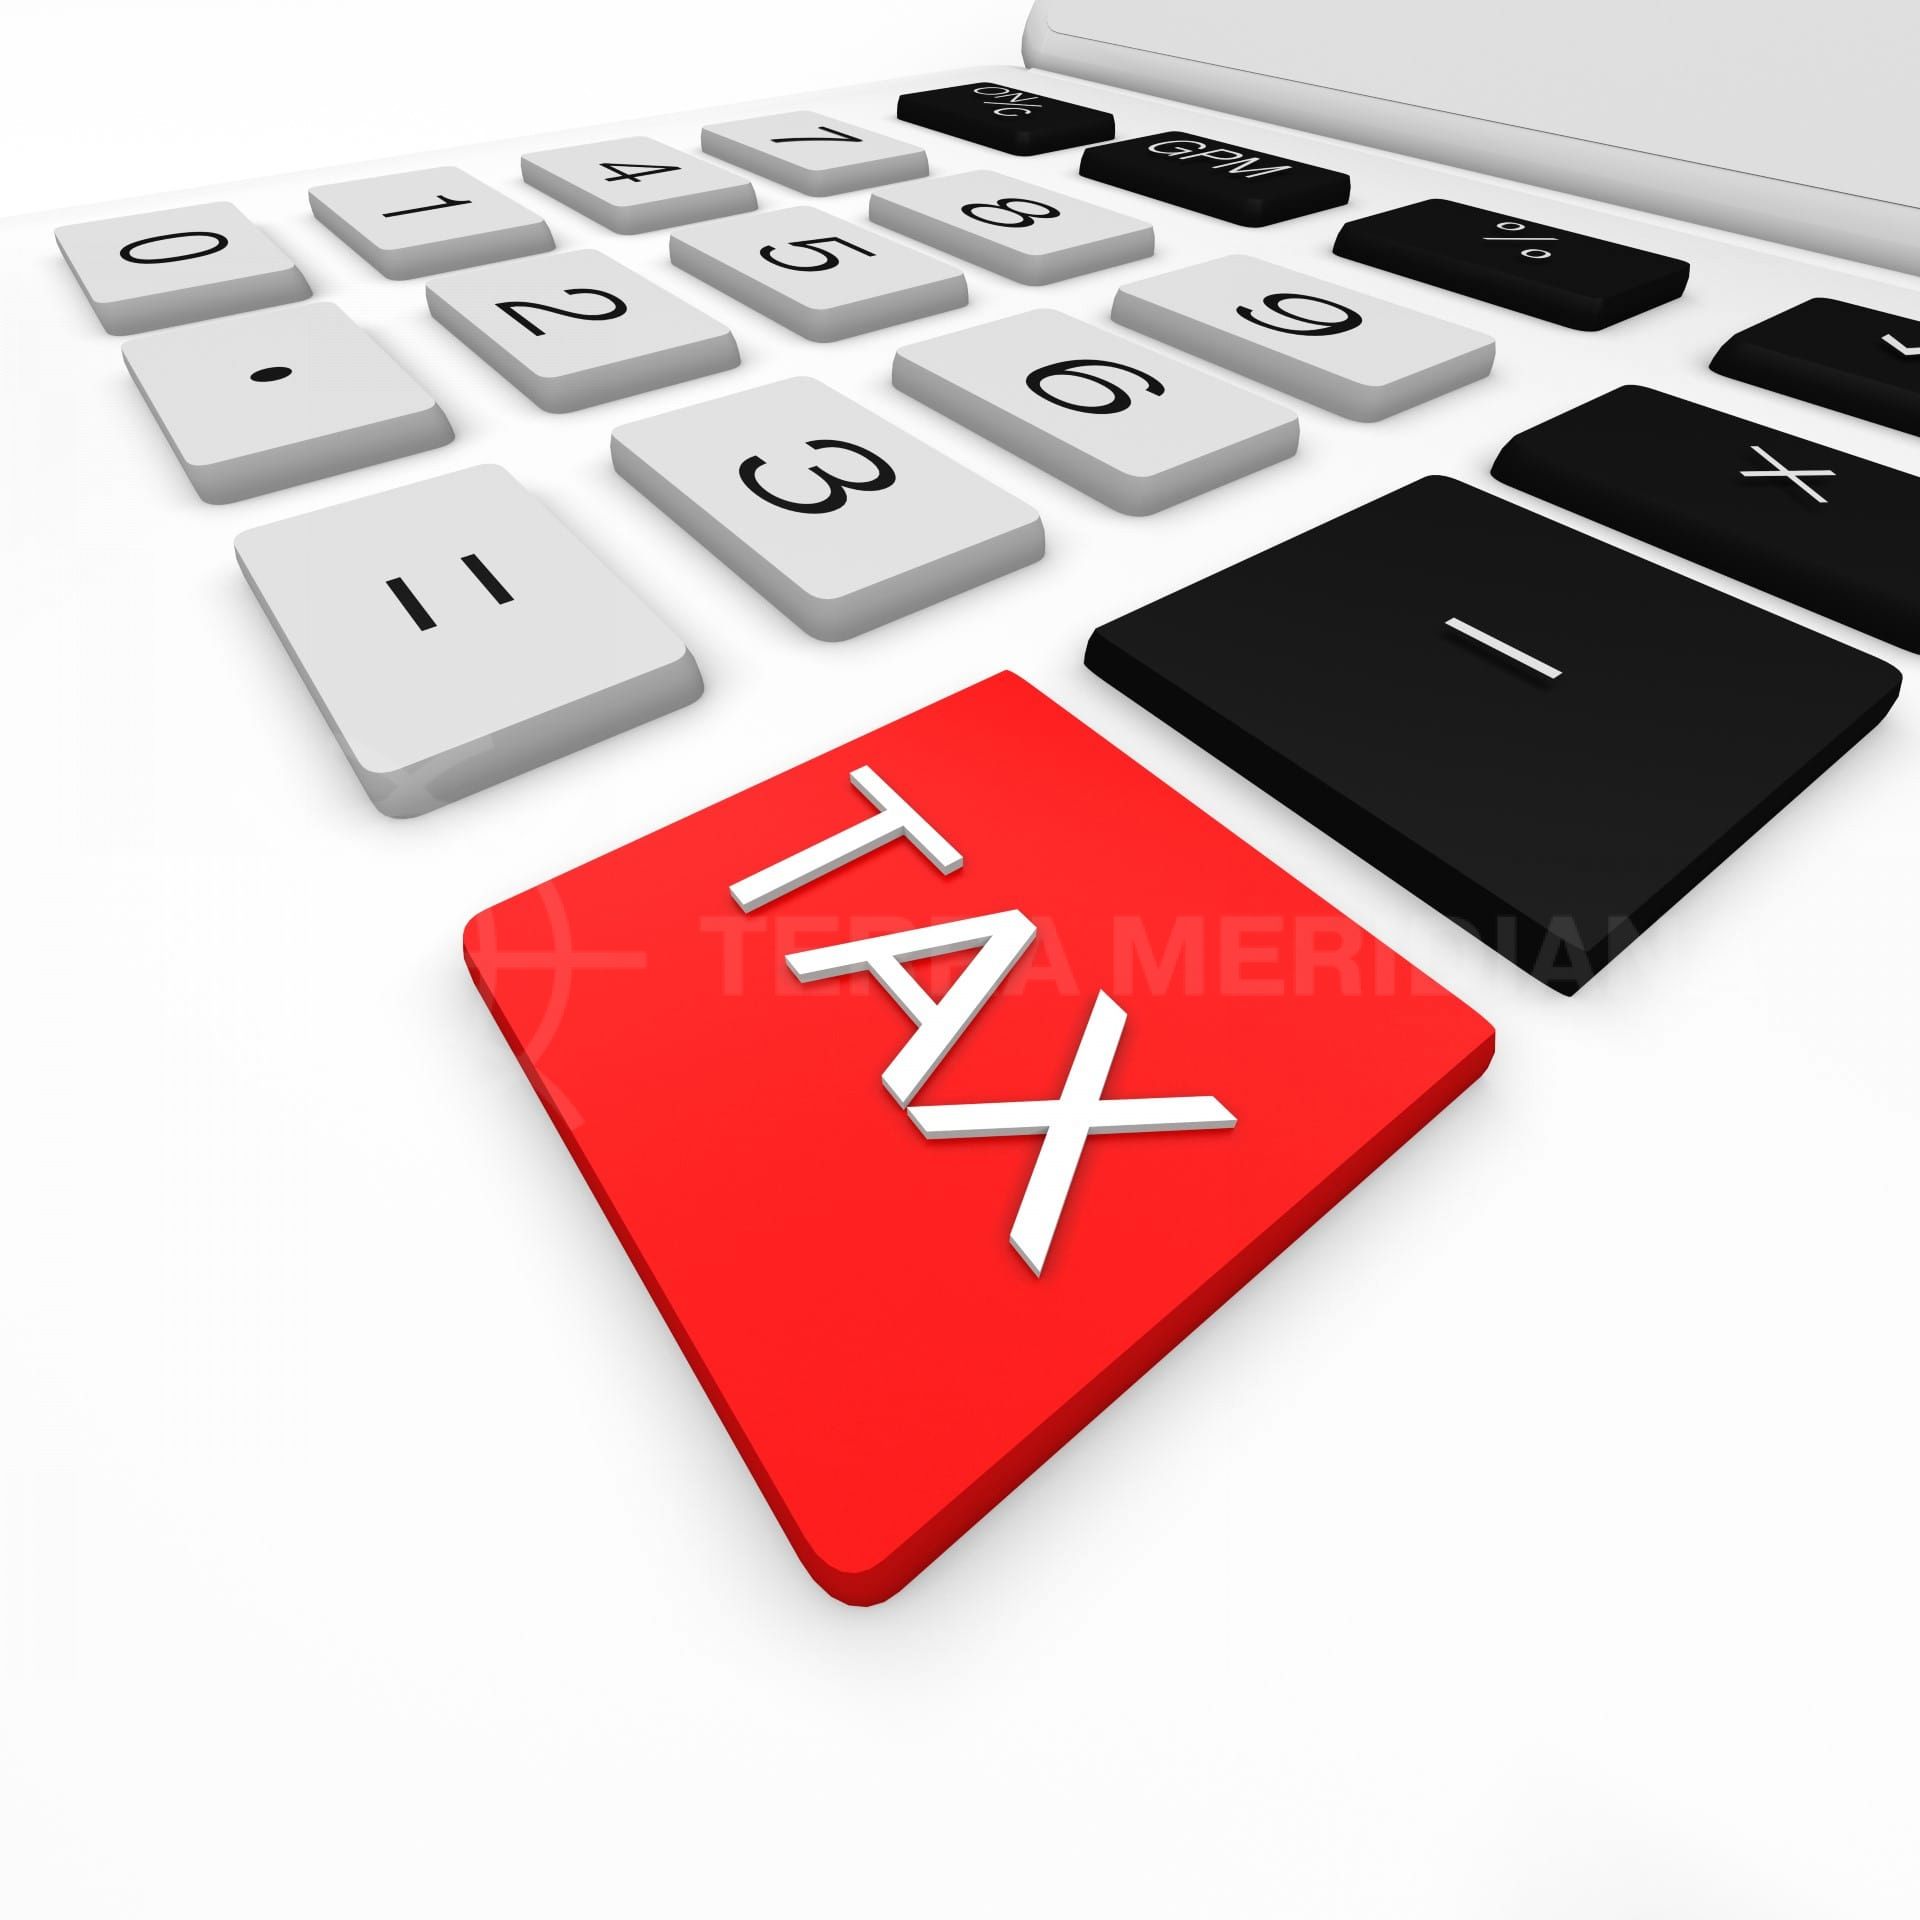 Wealth Tax in Spain – Should I stay or should I go?